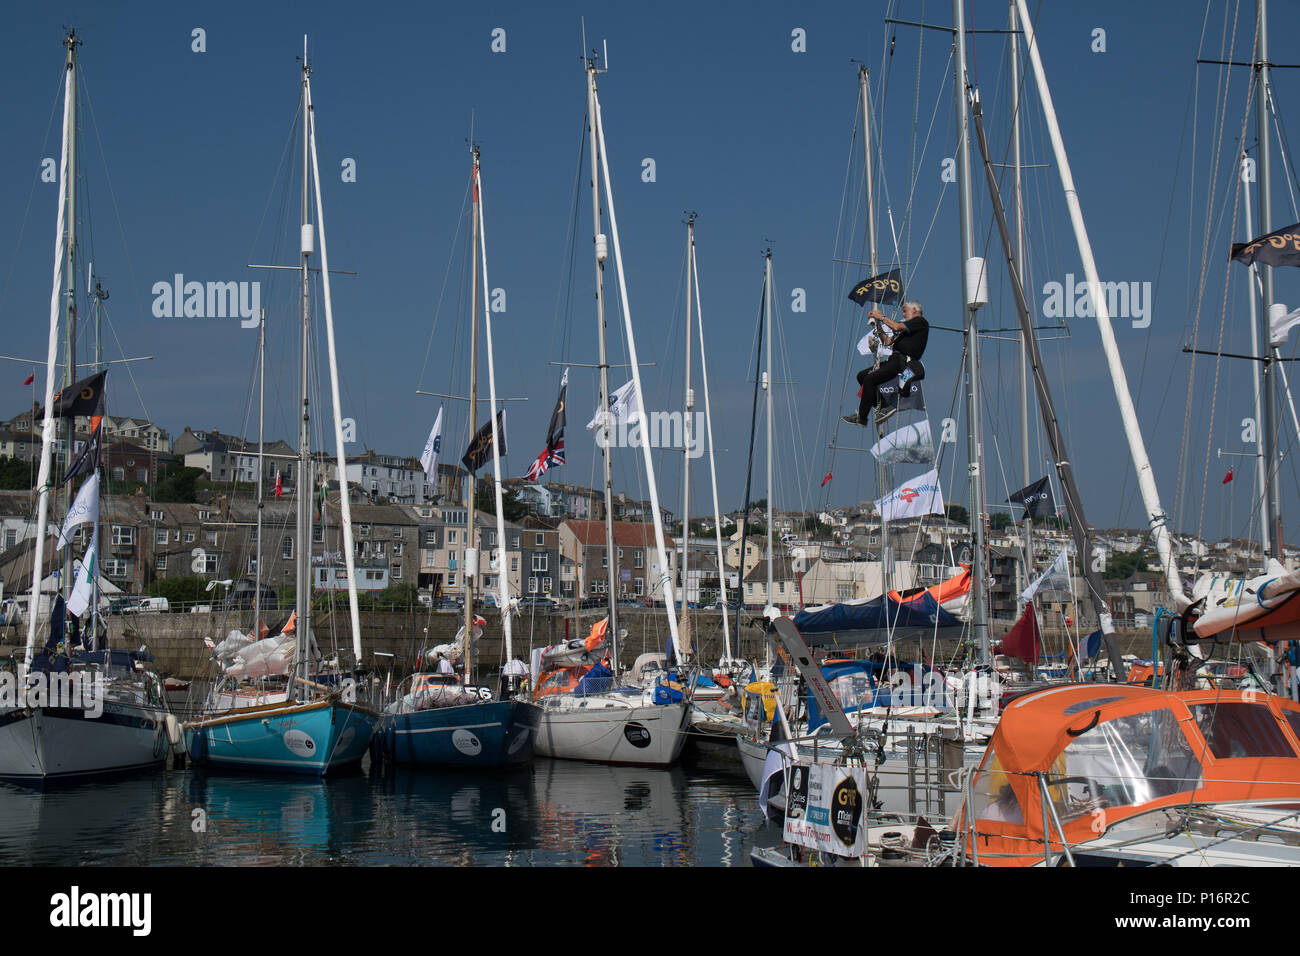 Falmouth, Cornwall, UK. 11th June 2018. Preparations are underway on boats moored at Falmouth, as part of the Start of the SITRaN Charity Race from Pendennis Point to Les Sables d’Olonne, the first stage of the 50th anniversary Golden Globe Race which will commence from the French port on Sunday July 1st. Credit: Simon Maycock/Alamy Live News Stock Photo